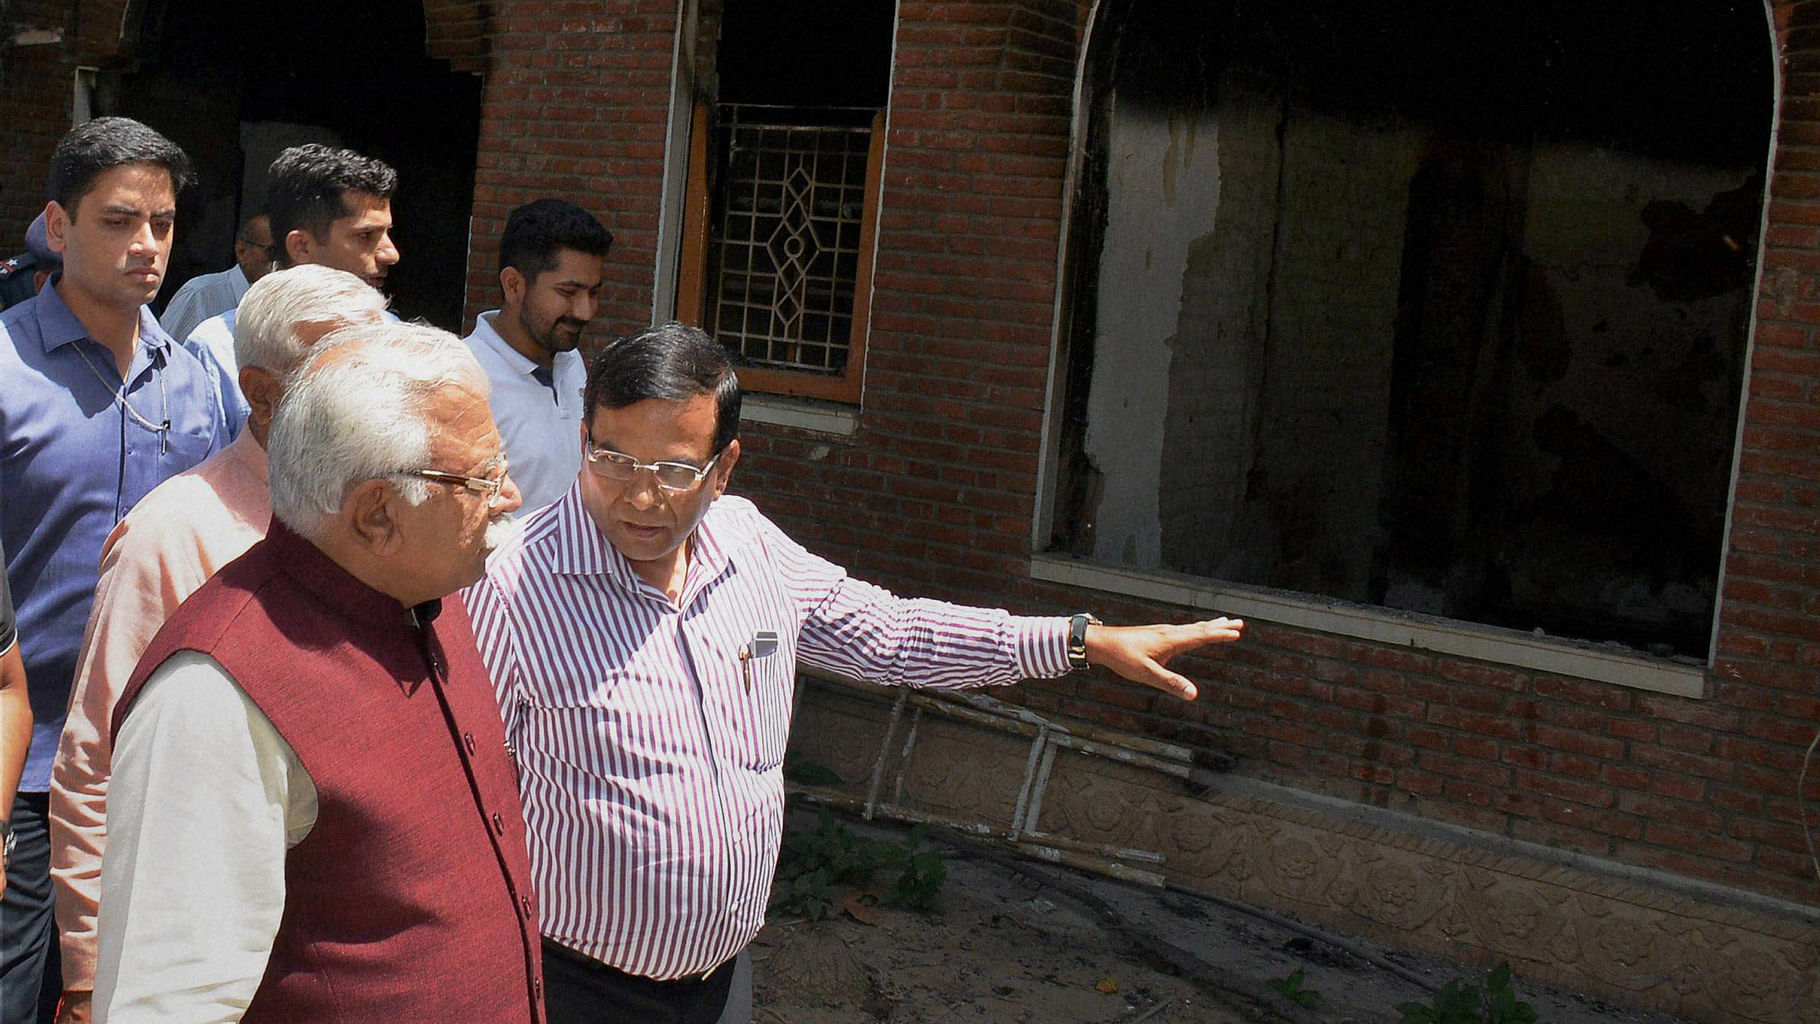 

Haryana Chief Minister ML Khattar visits the house of  Capt. Abhimanyu that was set on fire by some people during the agitation for reservation recently, in Rohtak on Monday. (Photo: PTI)